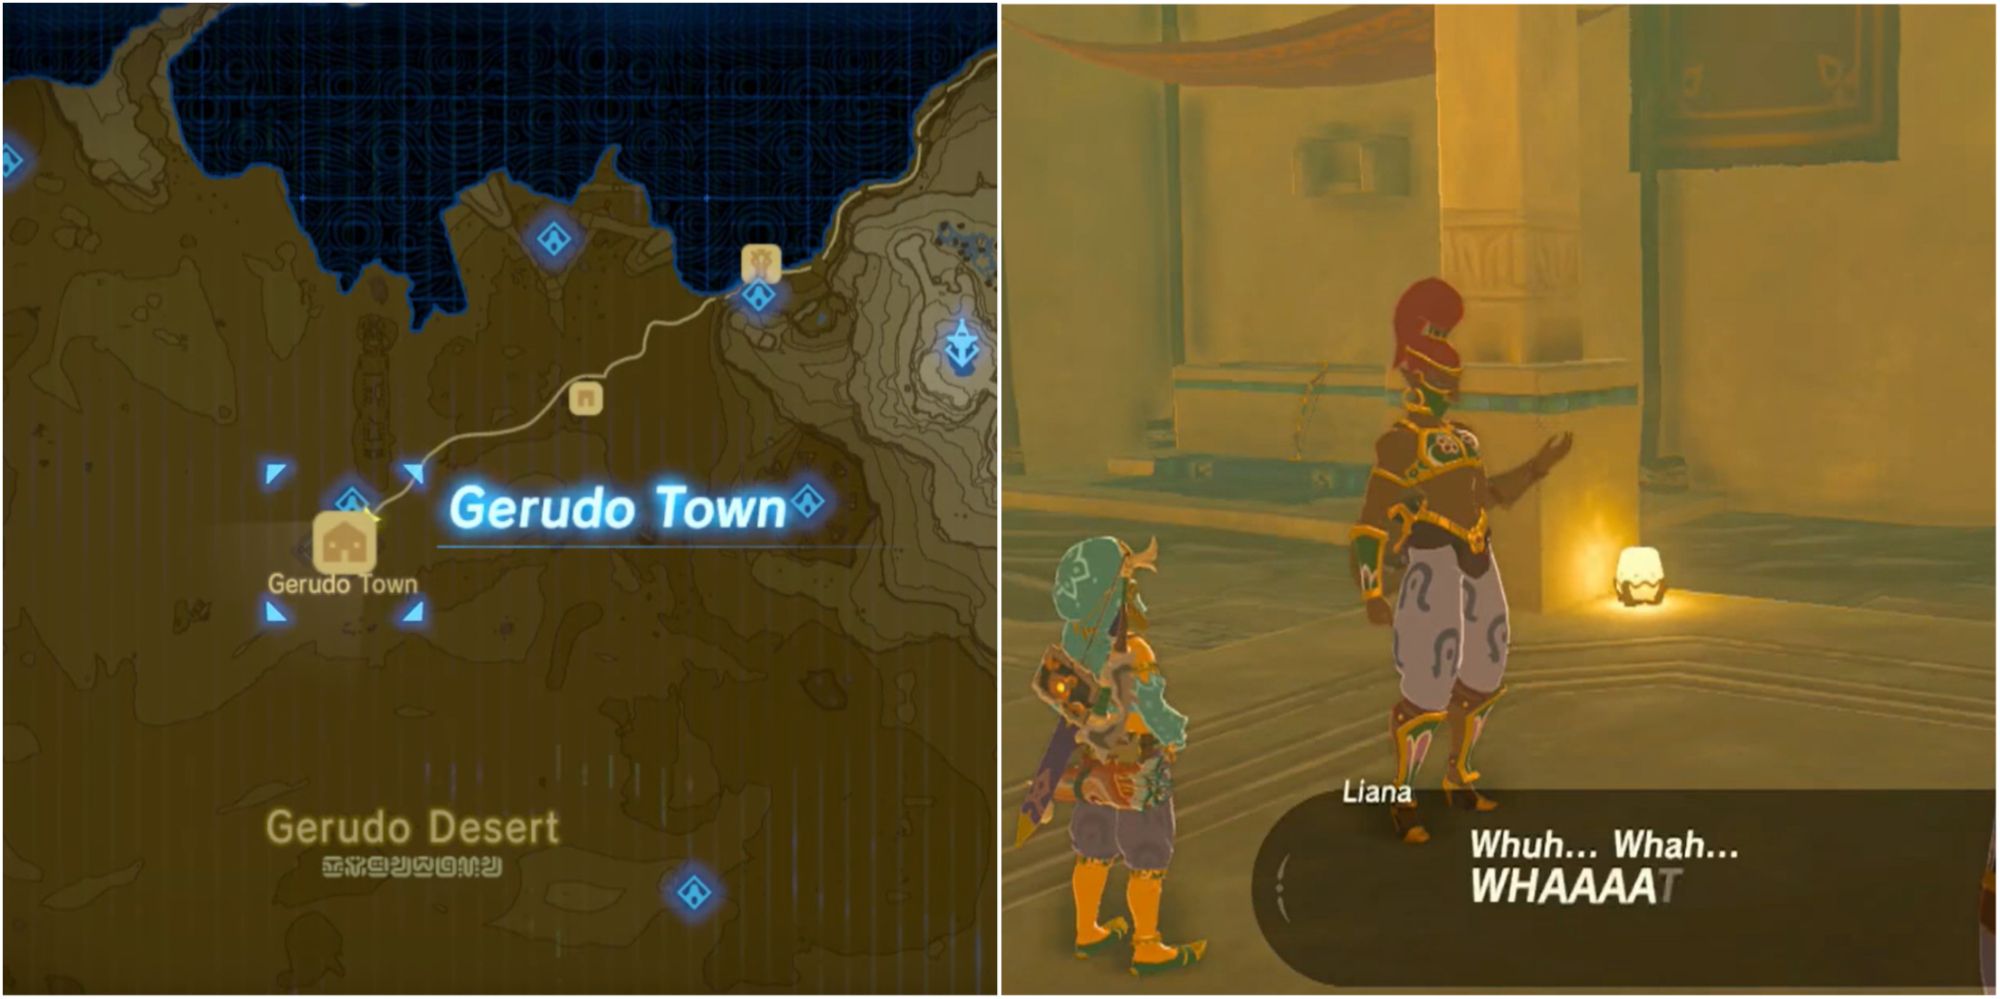 breath-of-the-wild-the-barta-quest-walkthrough-search-the-golden-news